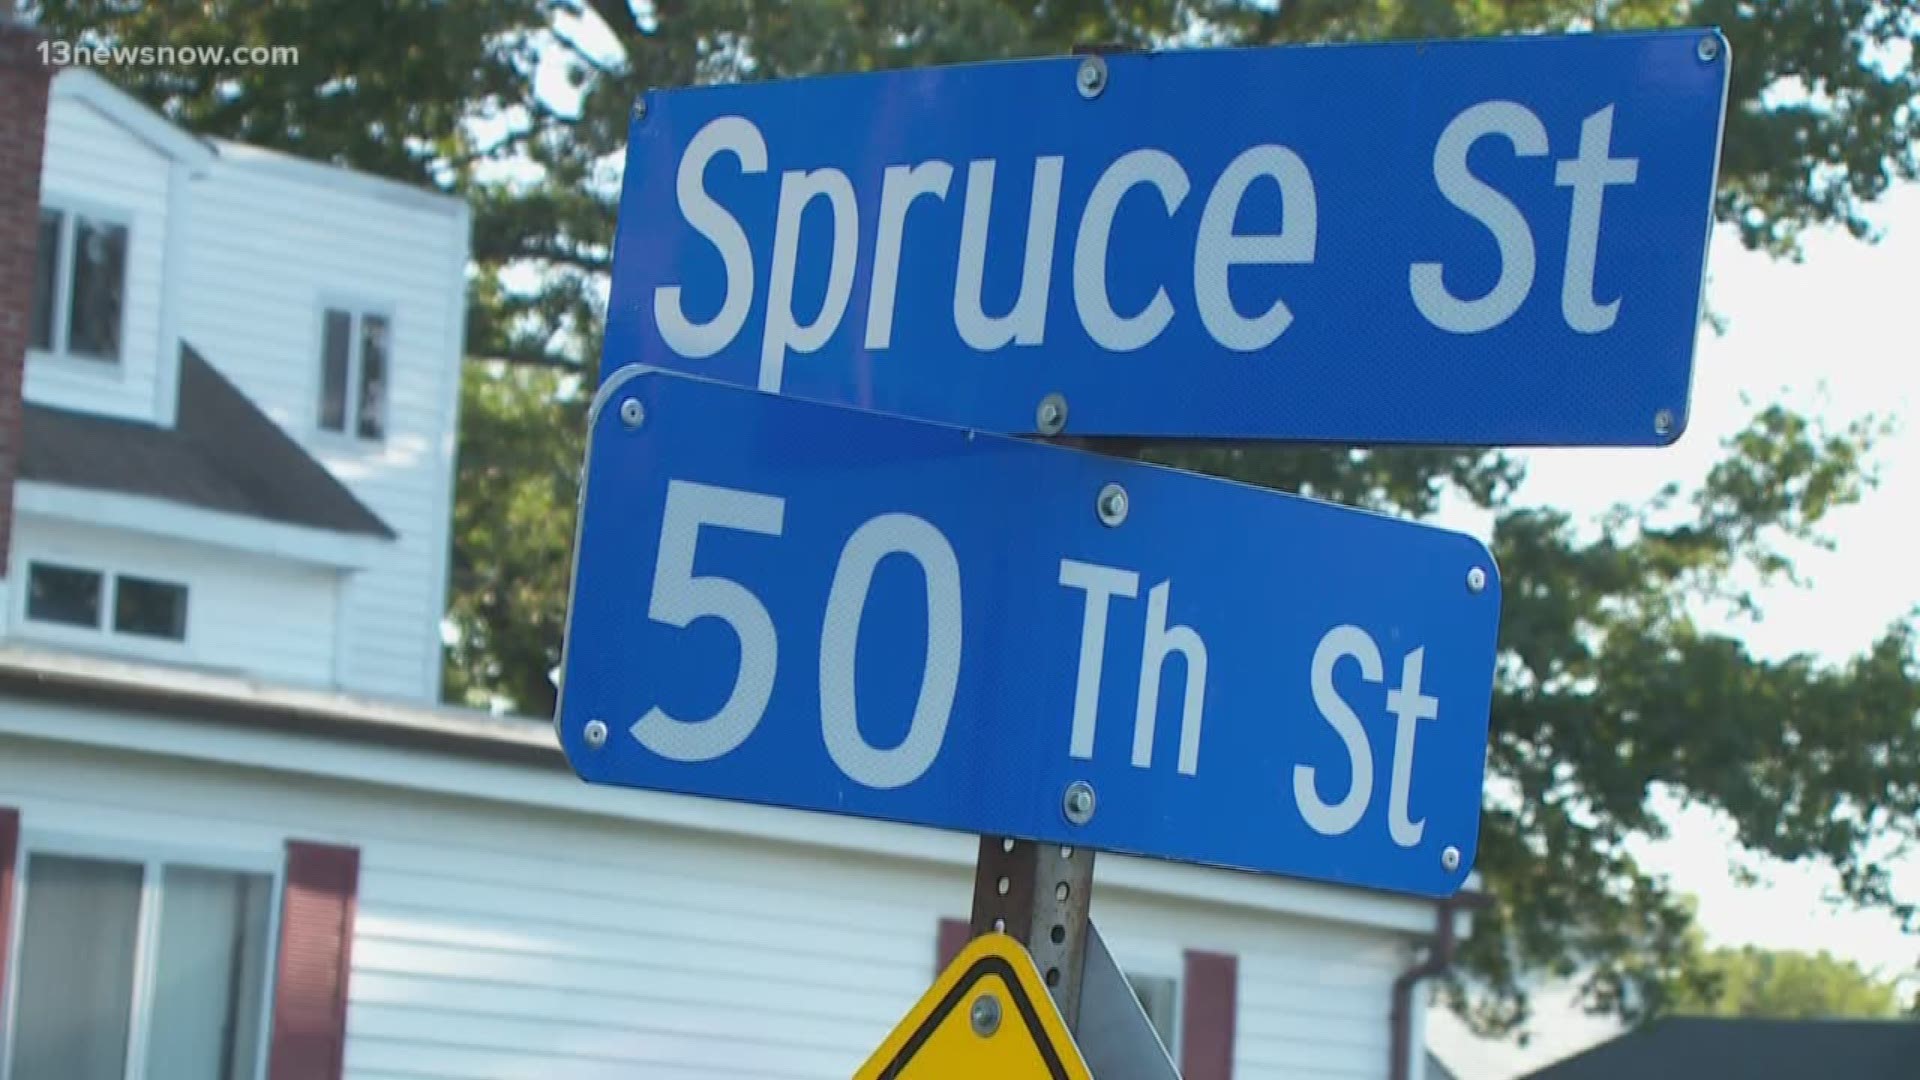 The homicide occurred on Spruce Street near 50th Street.